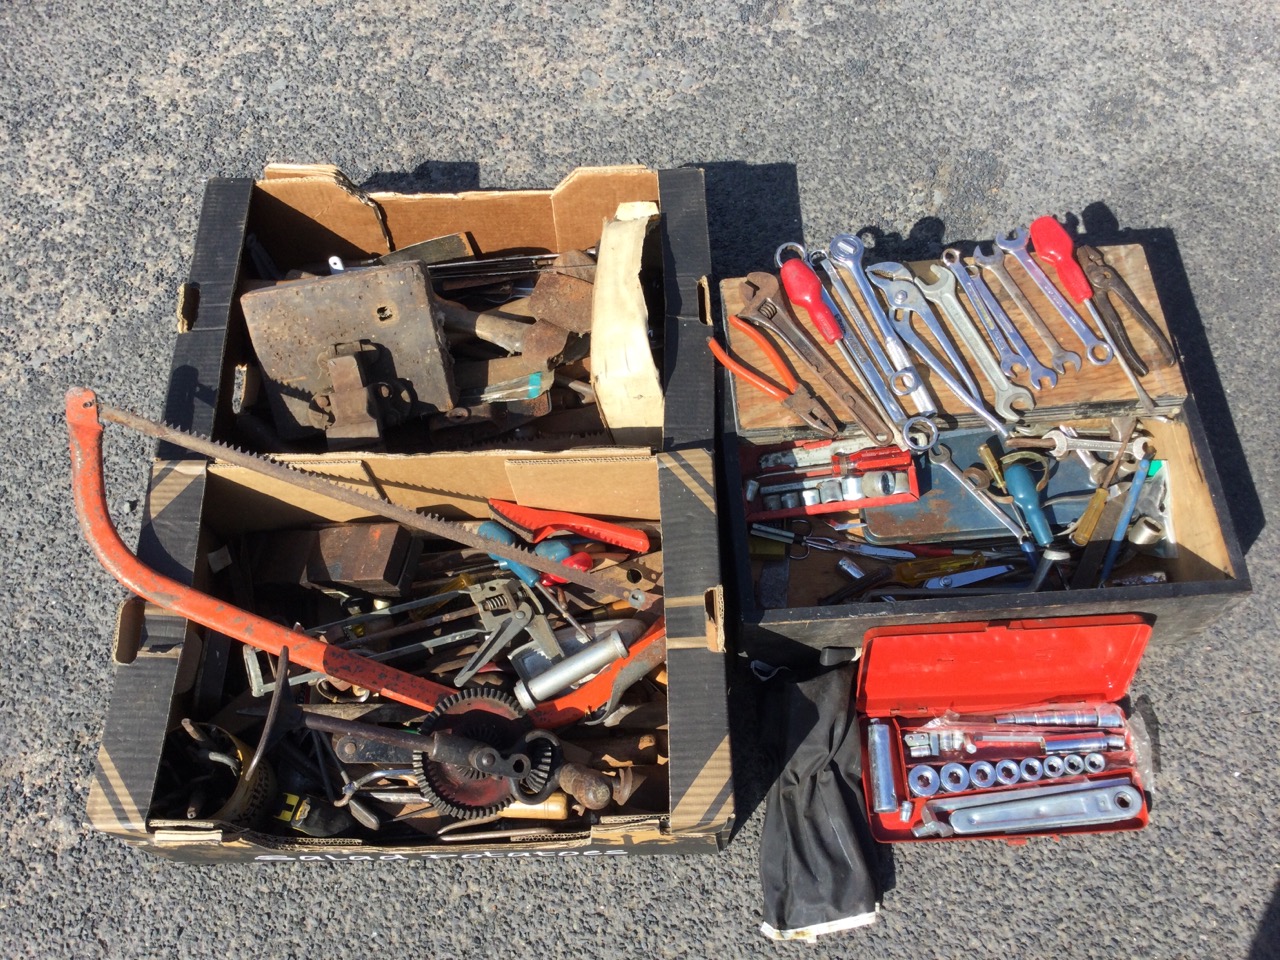 A small chest of mechanics tools including spanners, pliers, a socket set, etc.; and two boxes of